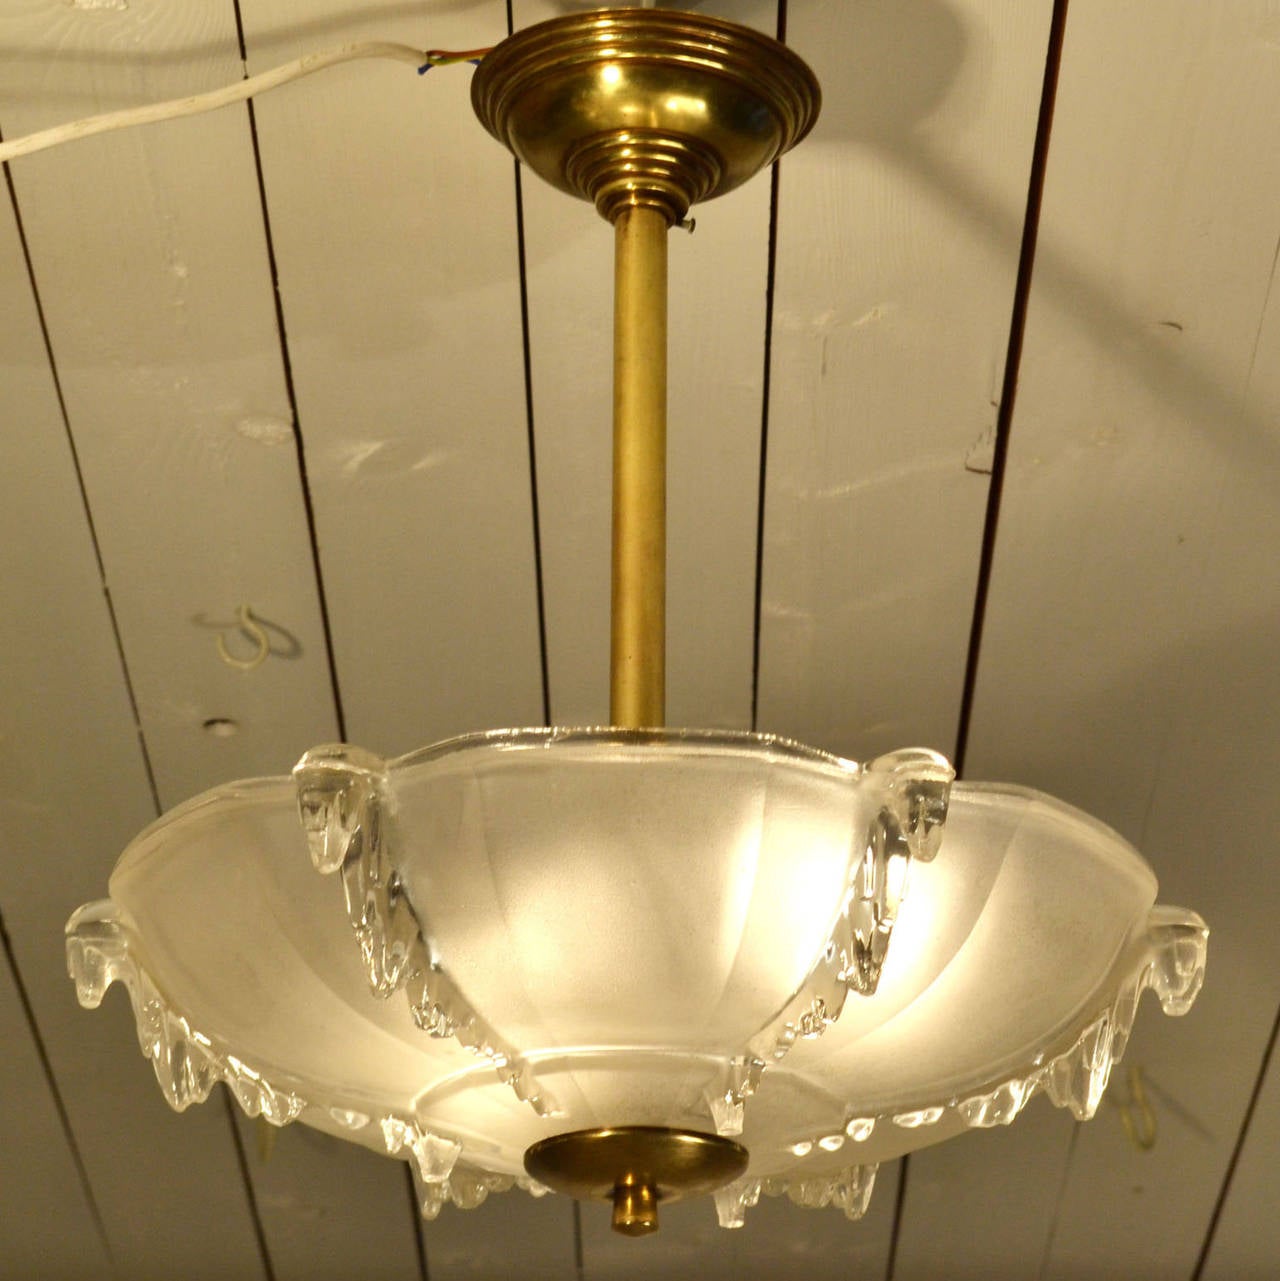 Typical French 1930's flush mount up-lighter. The molded glass shade is part frosted and decorated with clear ice pegs. The shade is connected to the ceiling by a brass stem.